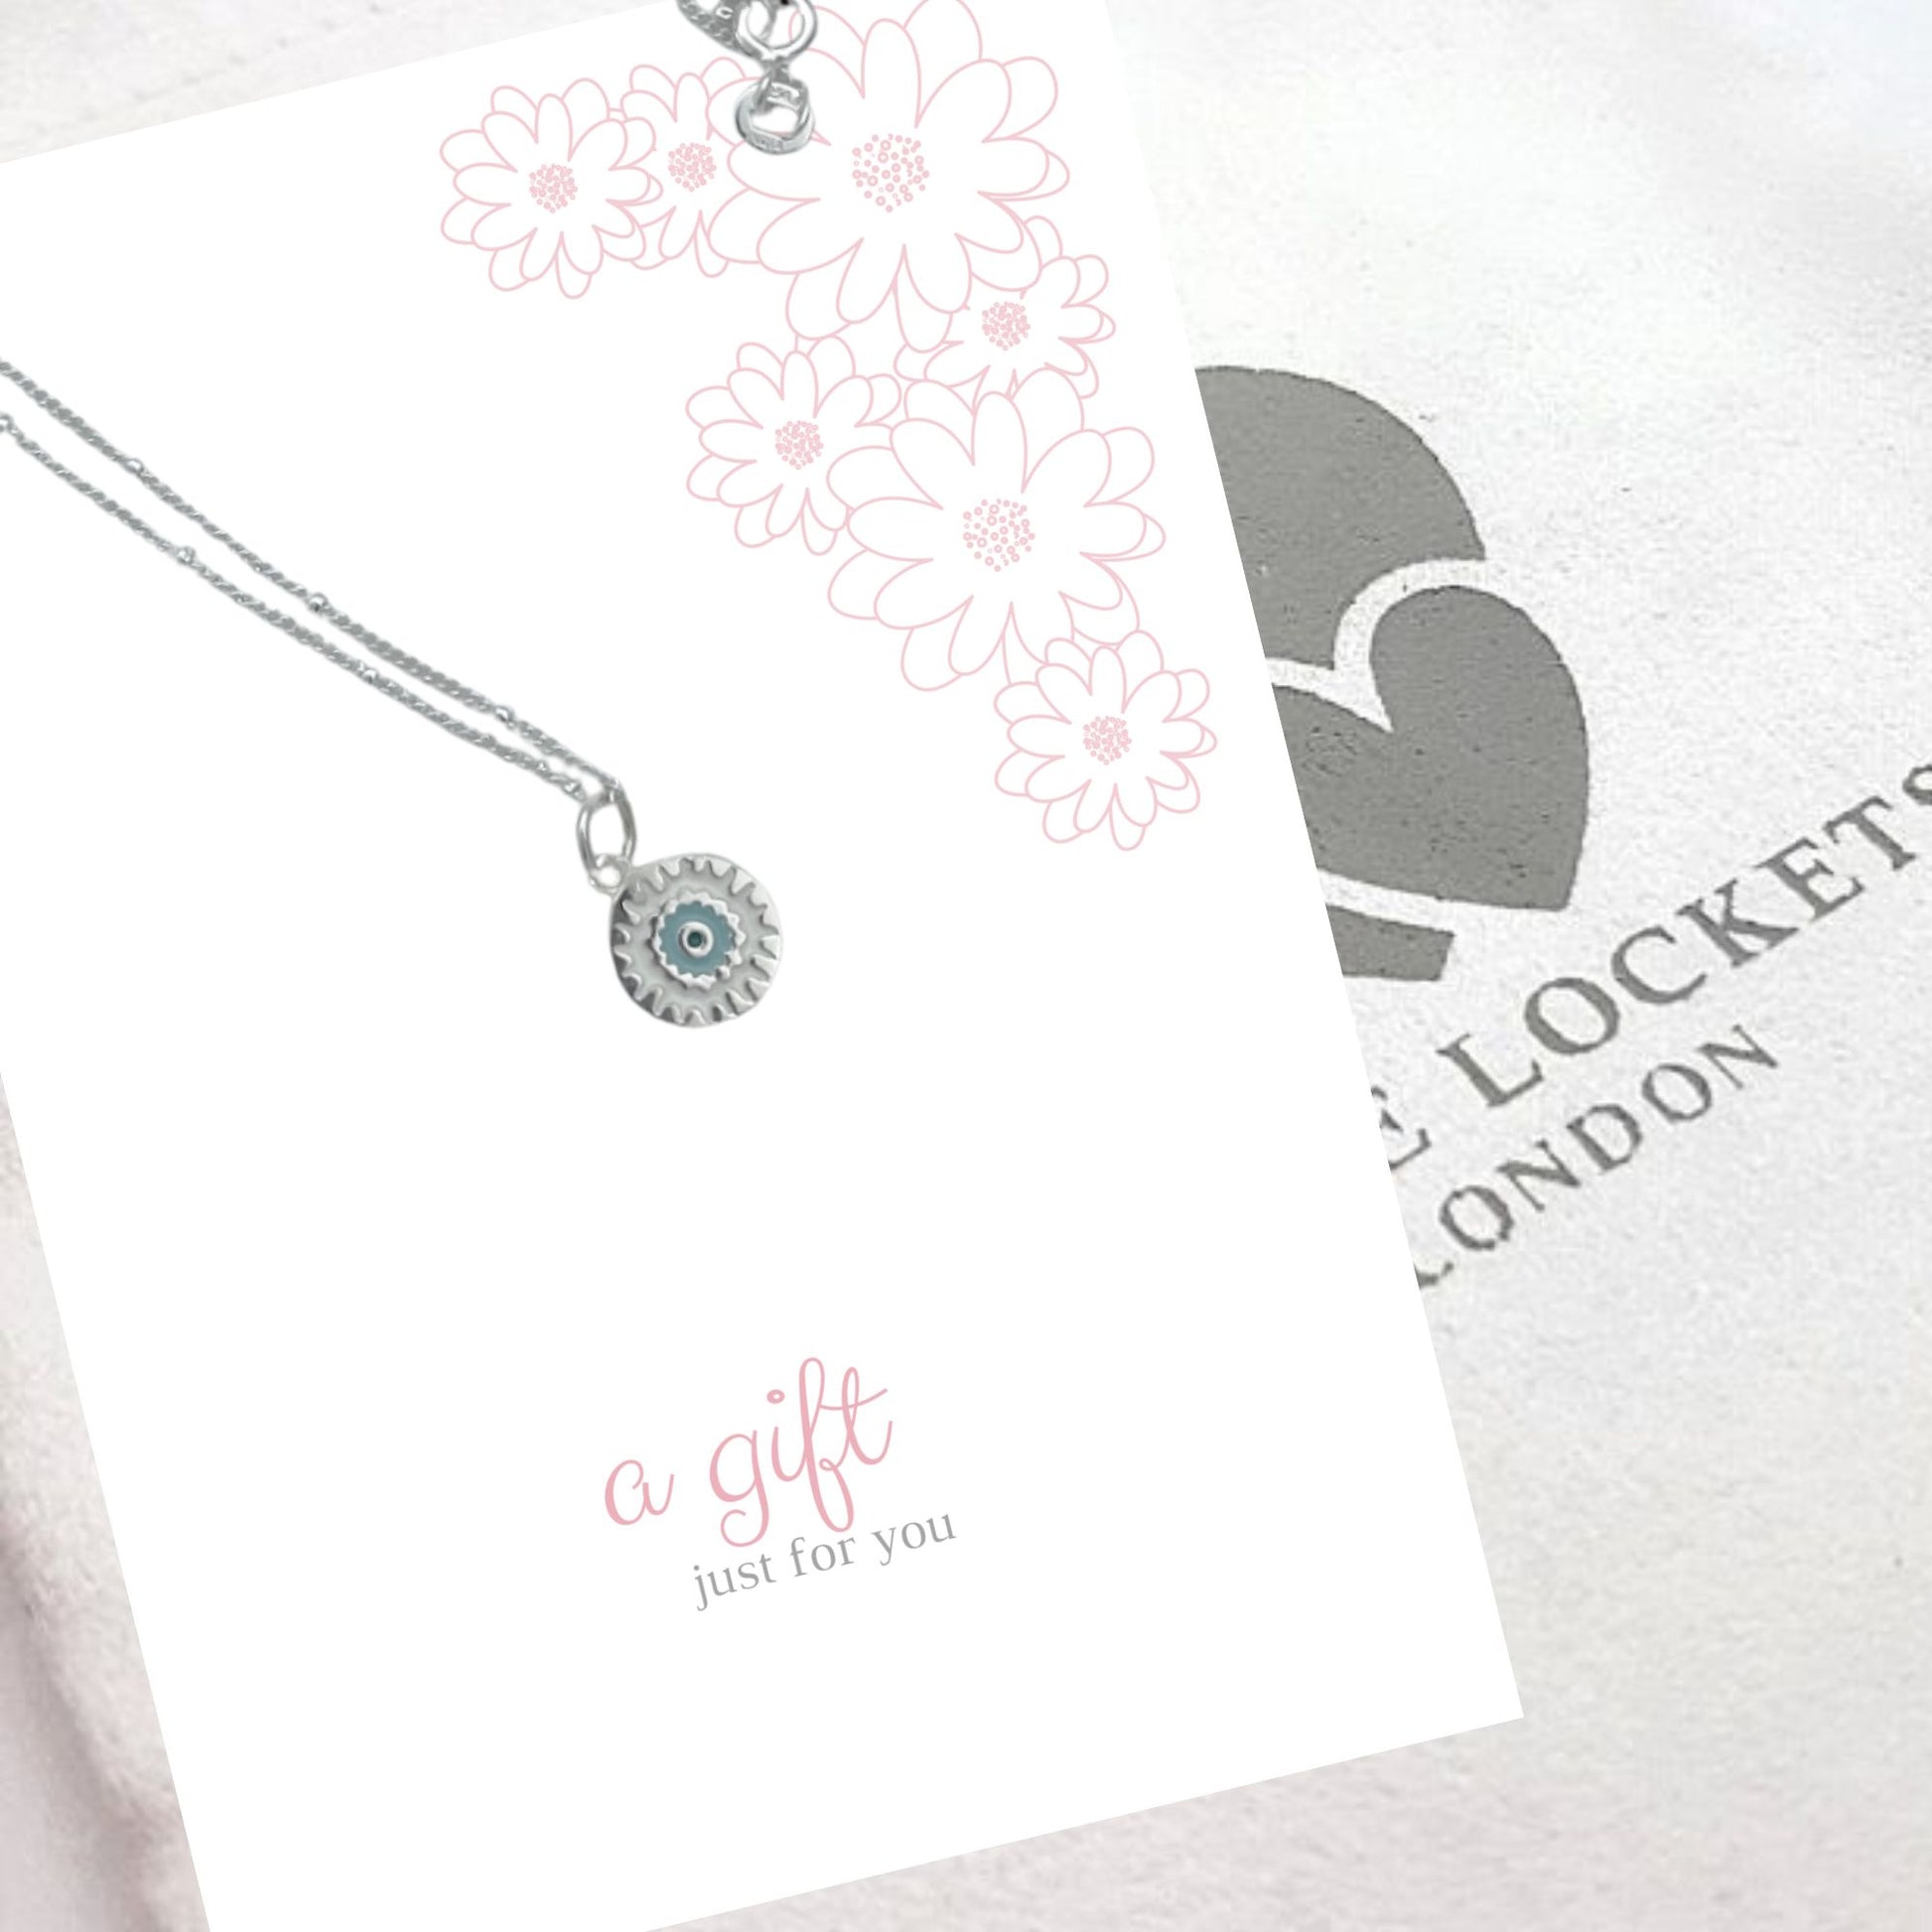 Sterling silver mandala pendant shown on pink gift card "A gift for you" and with luxury gift pouch